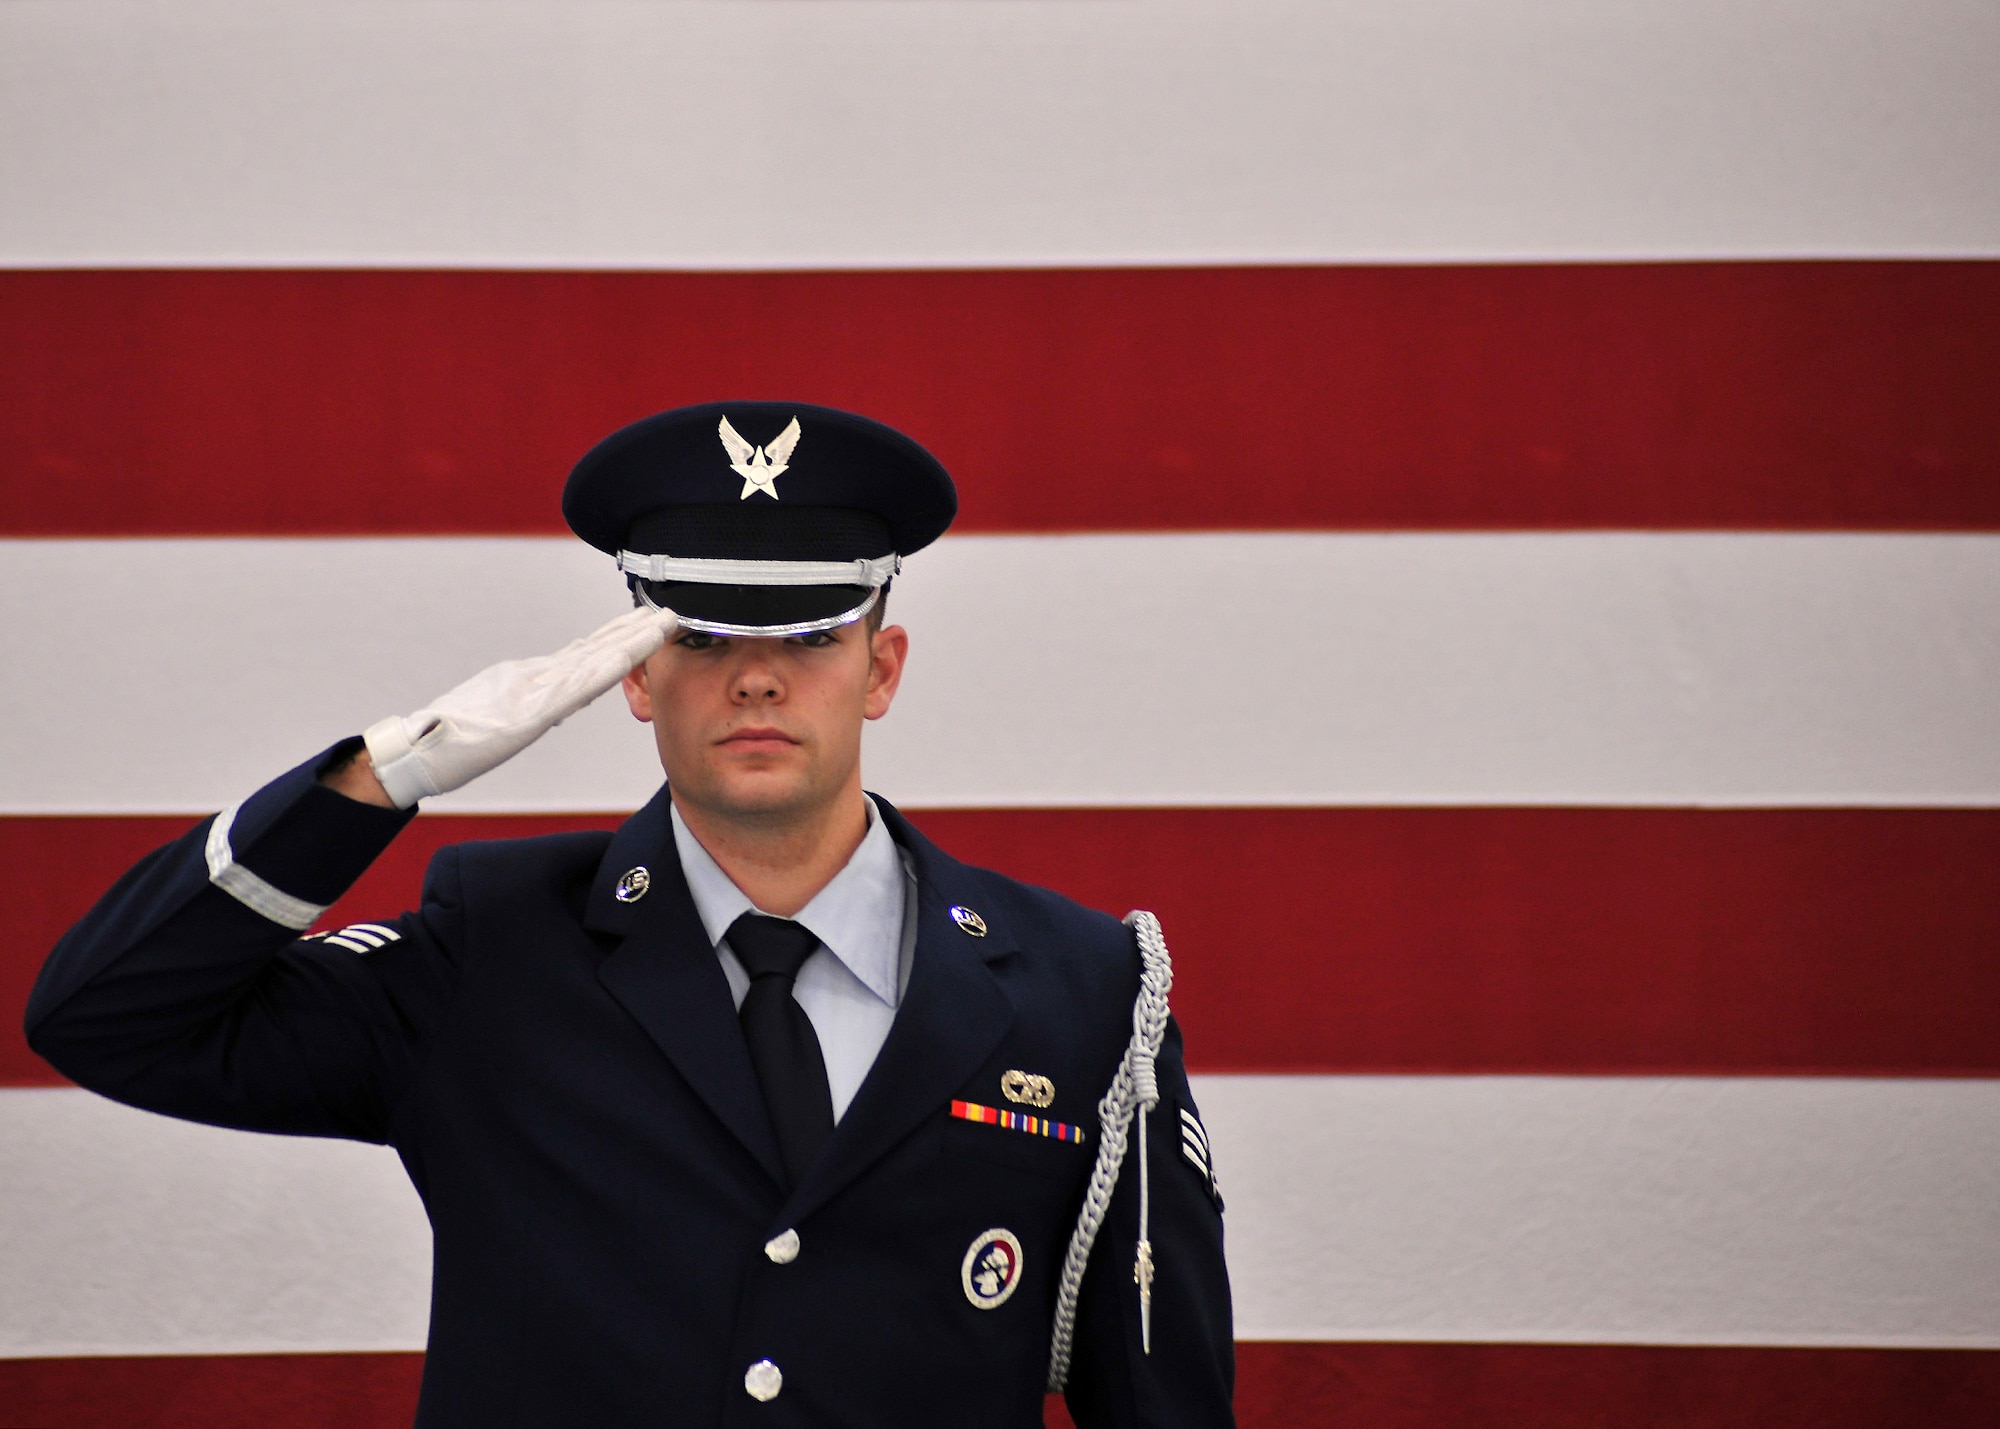 Senior Airman Syler Feldman, Grand Forks Air Force Base Honor Guard ceremonial guardsman, renders a salute to a folded U.S. flag during a two-man flag folding practice session Oct. 22, 2014, inside the honor guard building on Grand Forks Air Force Base, N.D. The 22-year-old from San Diego, Calif., was named the Grand Forks AFB Warrior of the Week for the fourth week of October 2014. (U.S. Air Force photo/Senior Airman Xavier Navarro) 